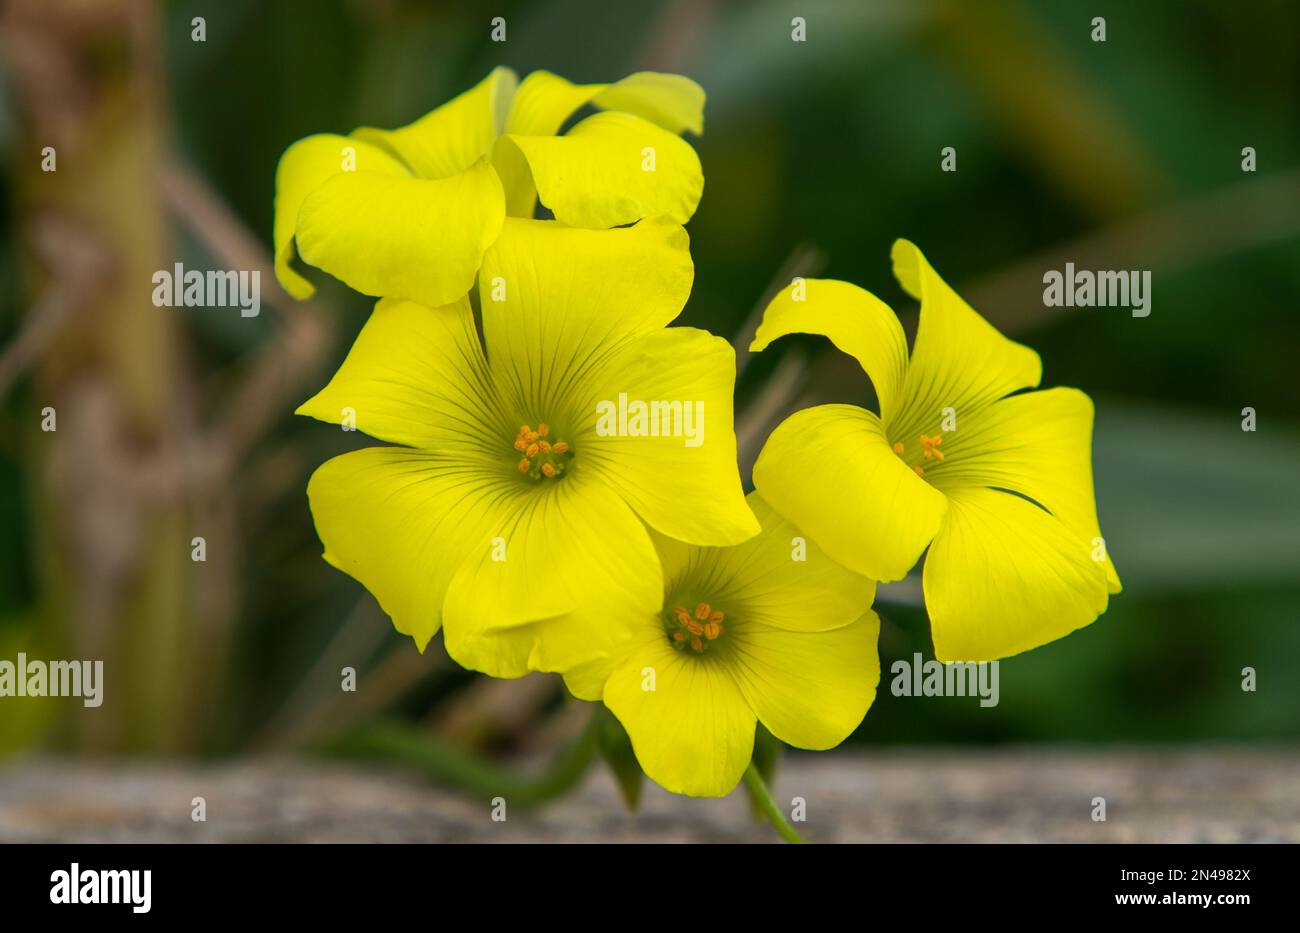 A close-up of some Oxalis pes-caprae flowers, natural Stock Photo